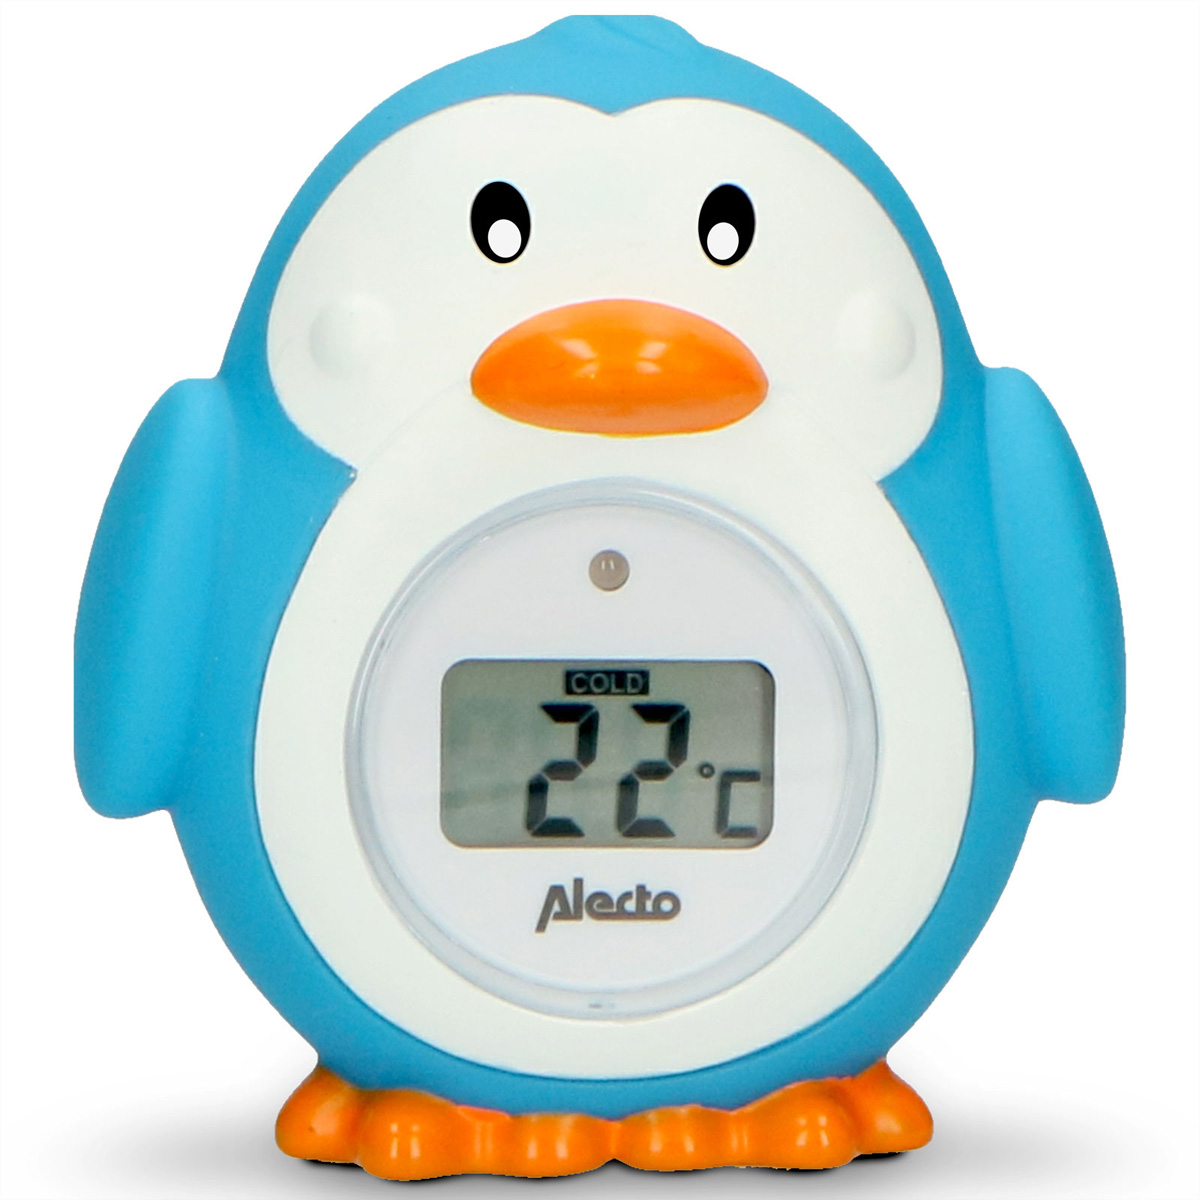 Alecto Badethermometer Penguin